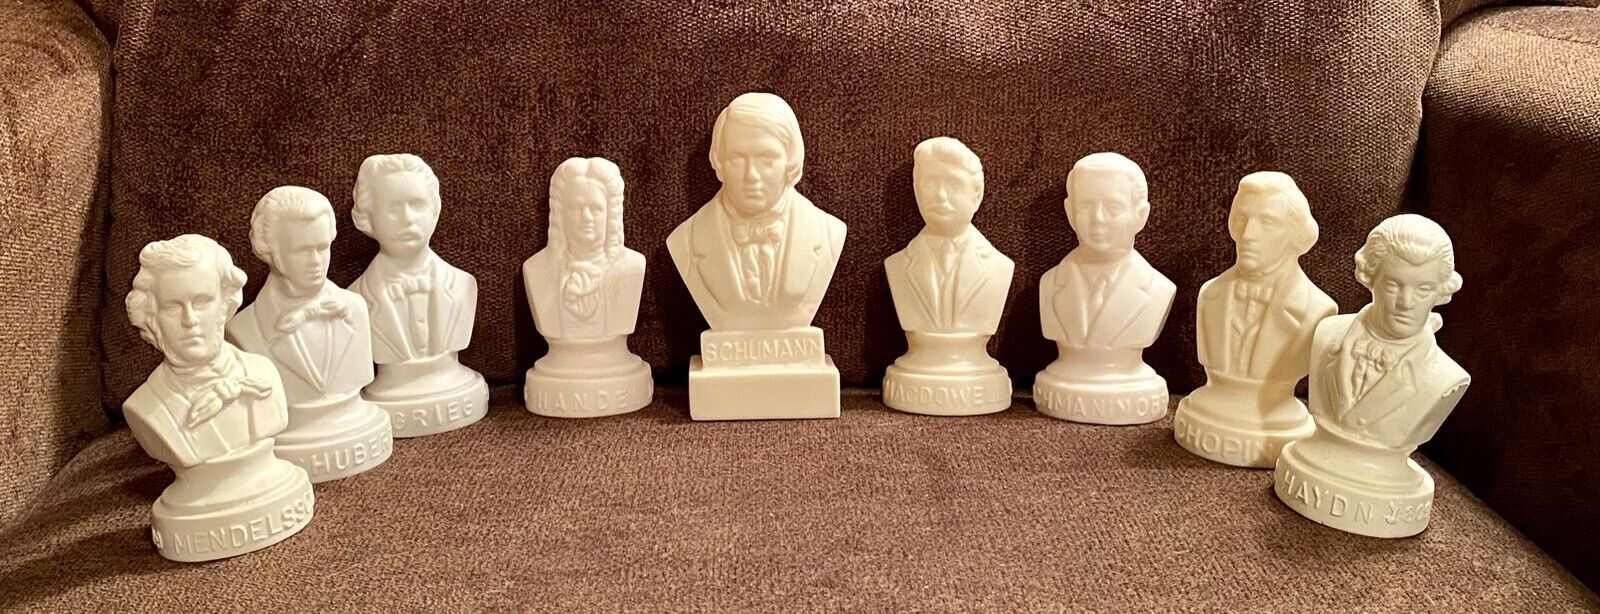 Set of 9 Vintage HALBE Famous Composers Statuettes Bust Figurine Collection 4-5”